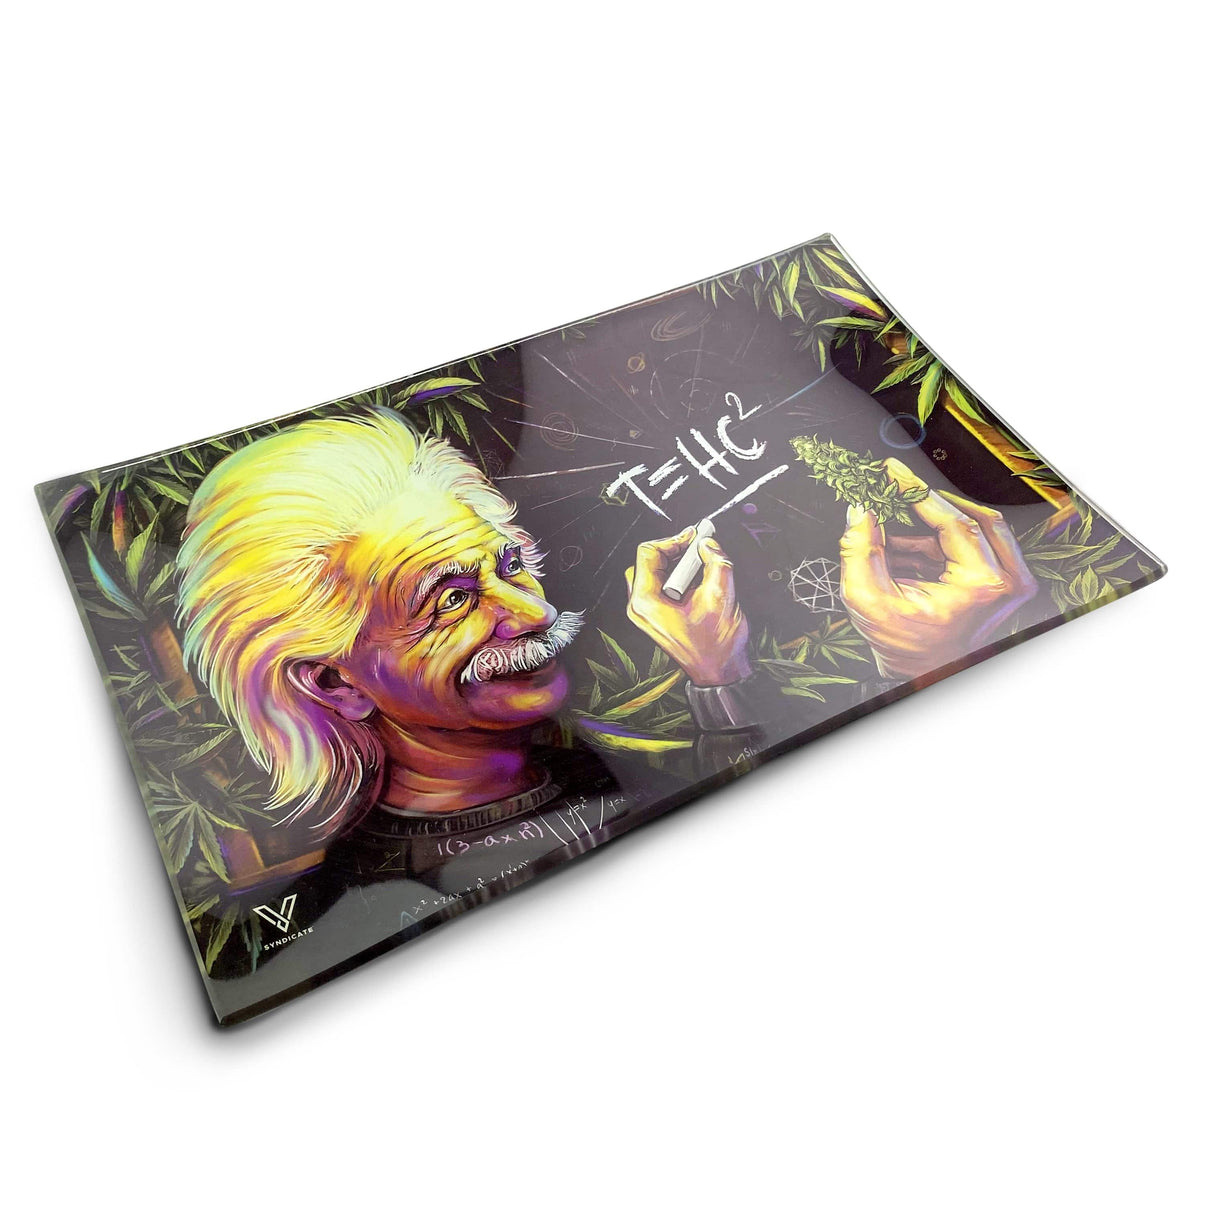 V Syndicate T=HC2 Einstein-themed glass rolling tray with vibrant artwork, medium size